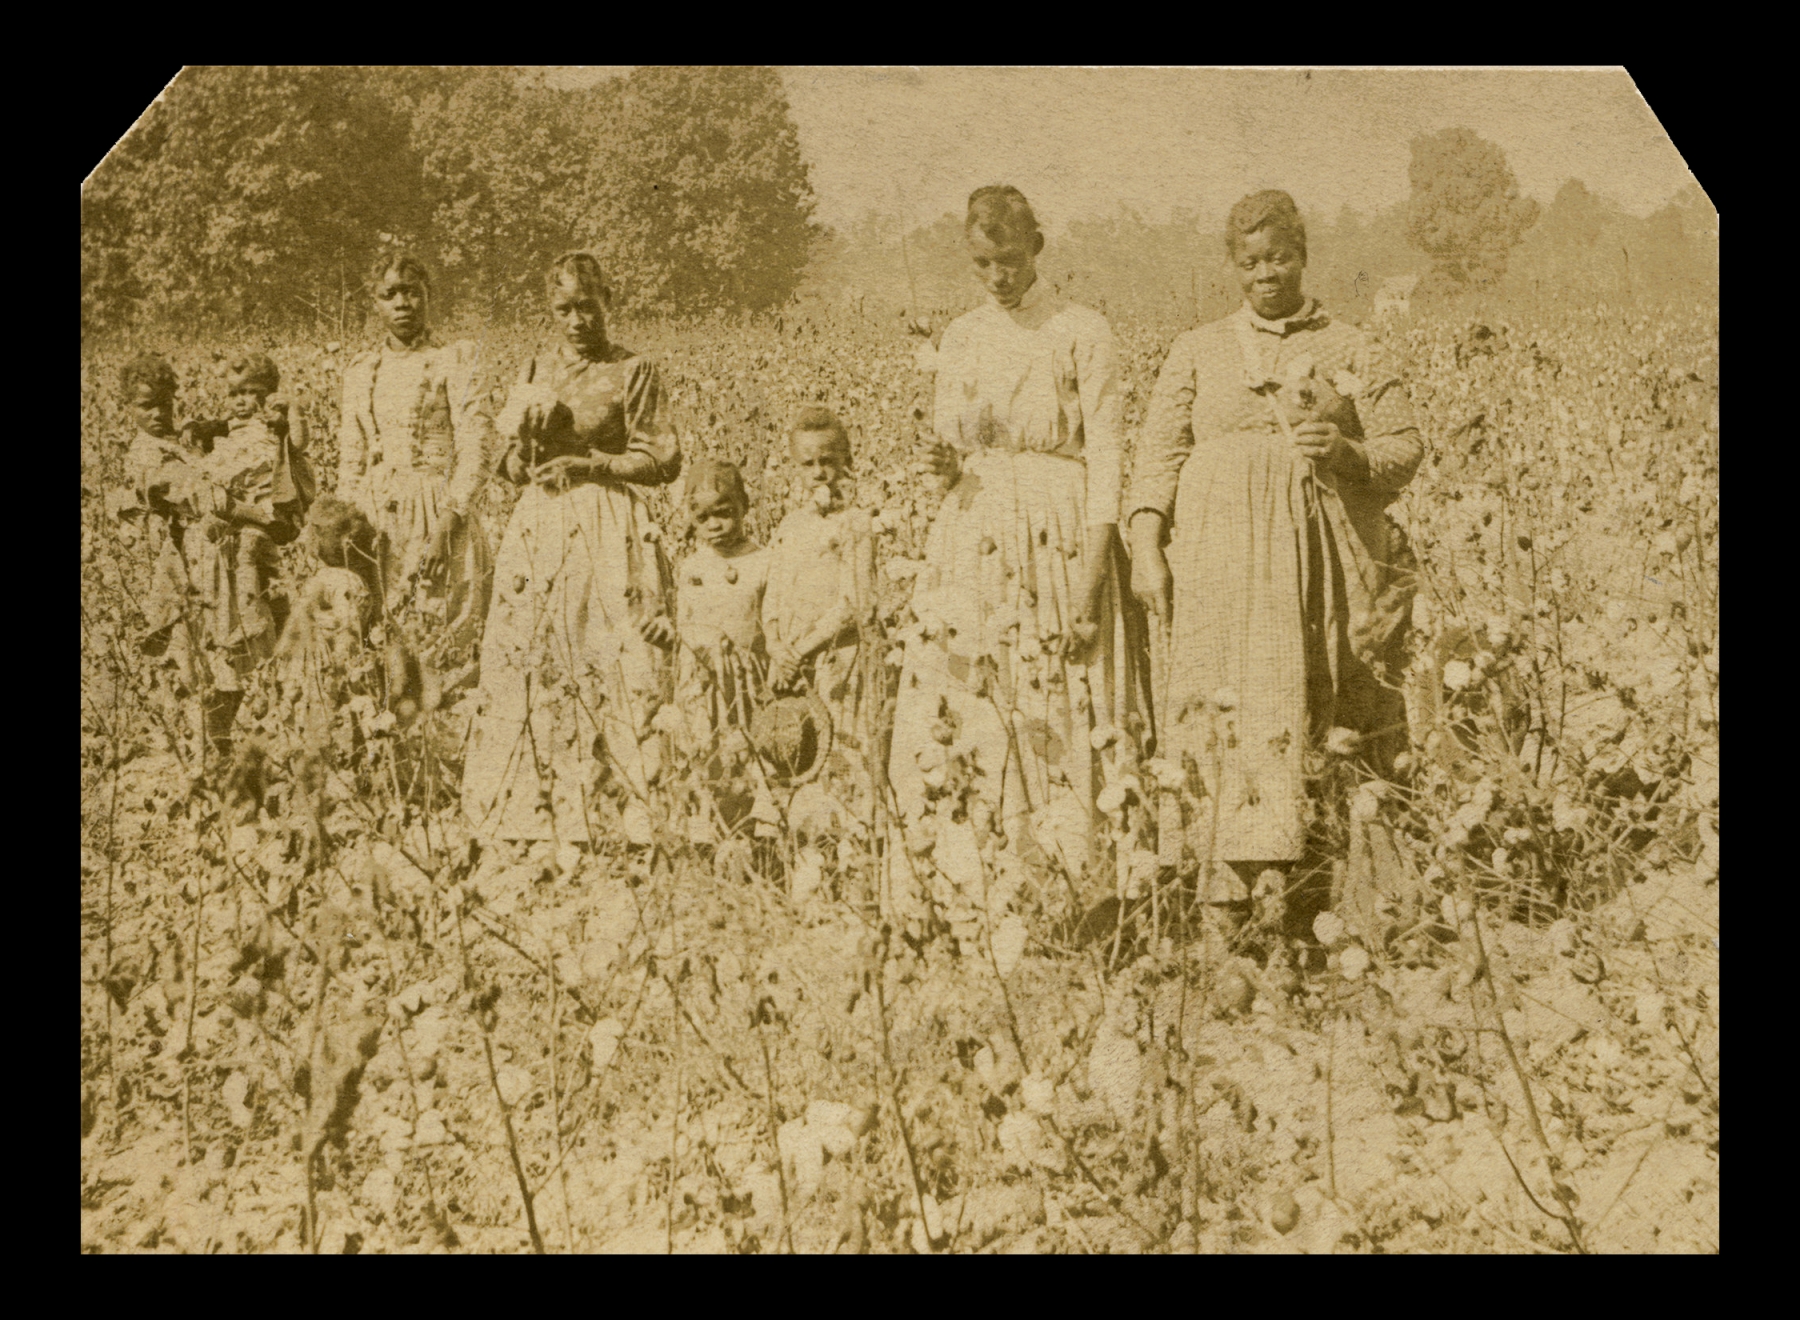 Women and children in a cotton field in the 1860s. J. H. Aylsworth, via the Smithsonian National Museum of African American History and Culture.